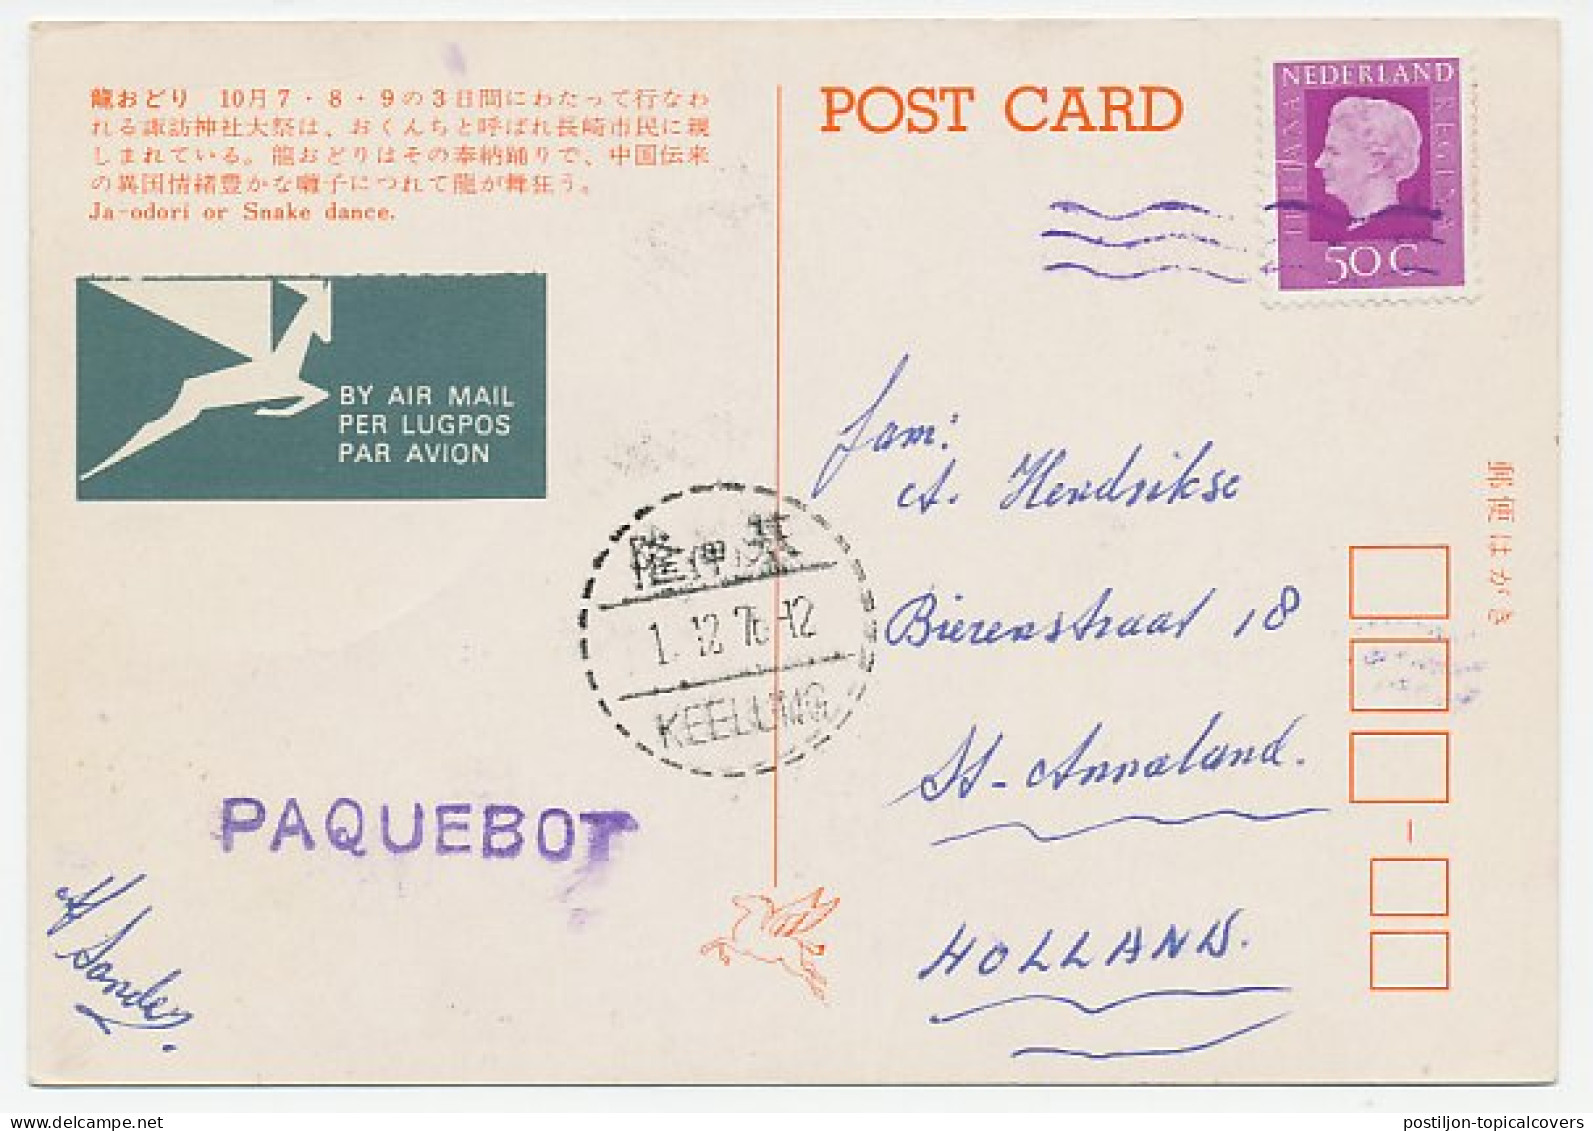 Paquebot Keelung - St. Annaland 1976 - Unclassified